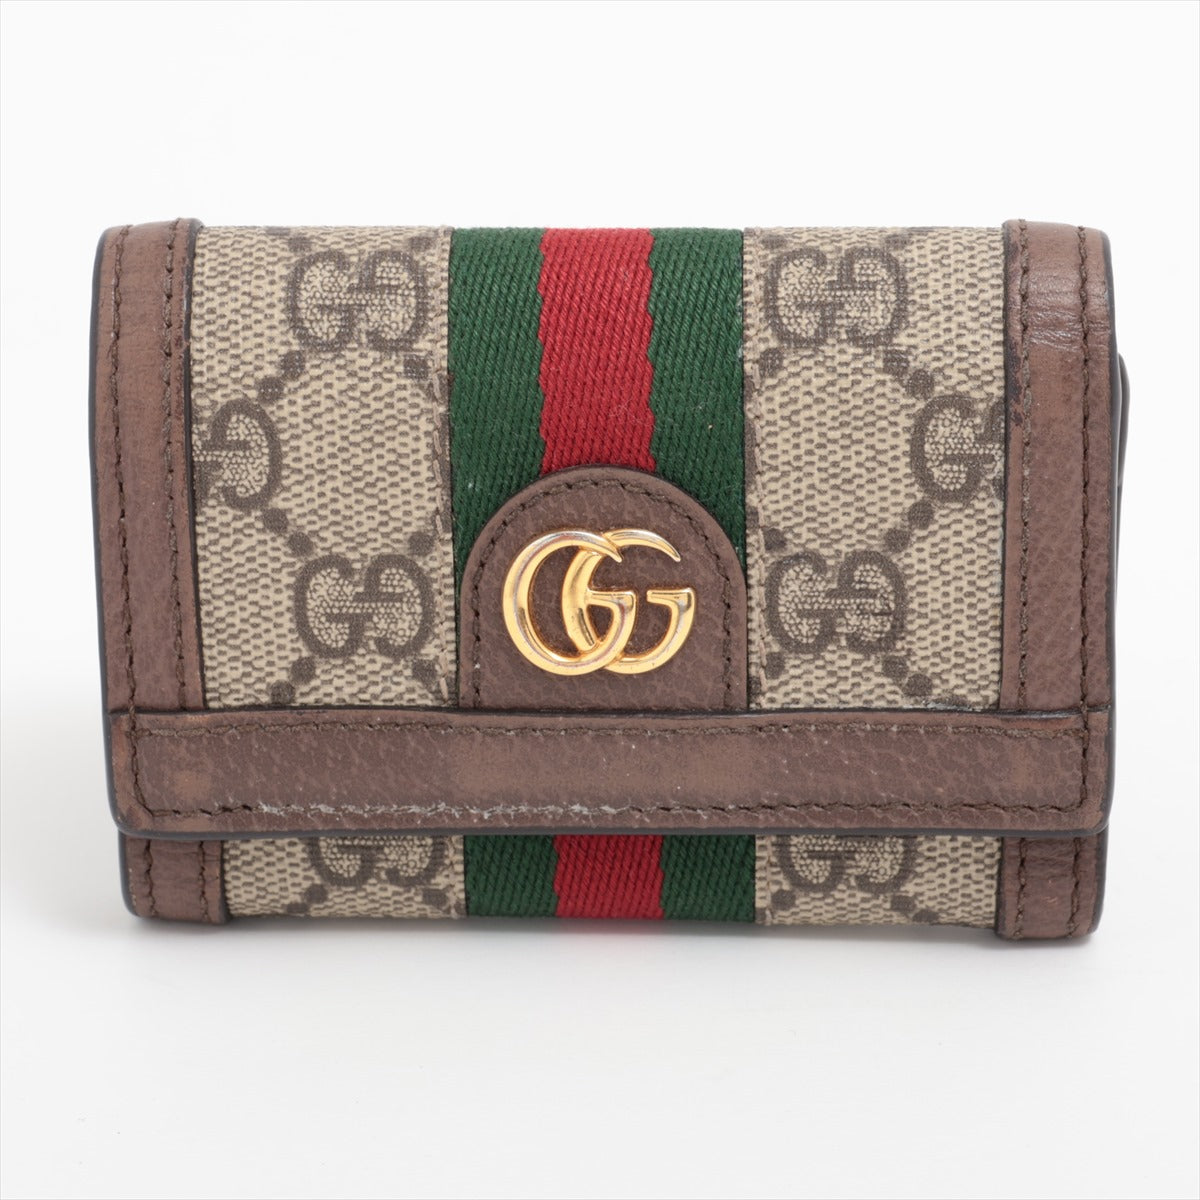 Gucci GG Marmont 644334 PVC  Leather Compact Wallet Brown